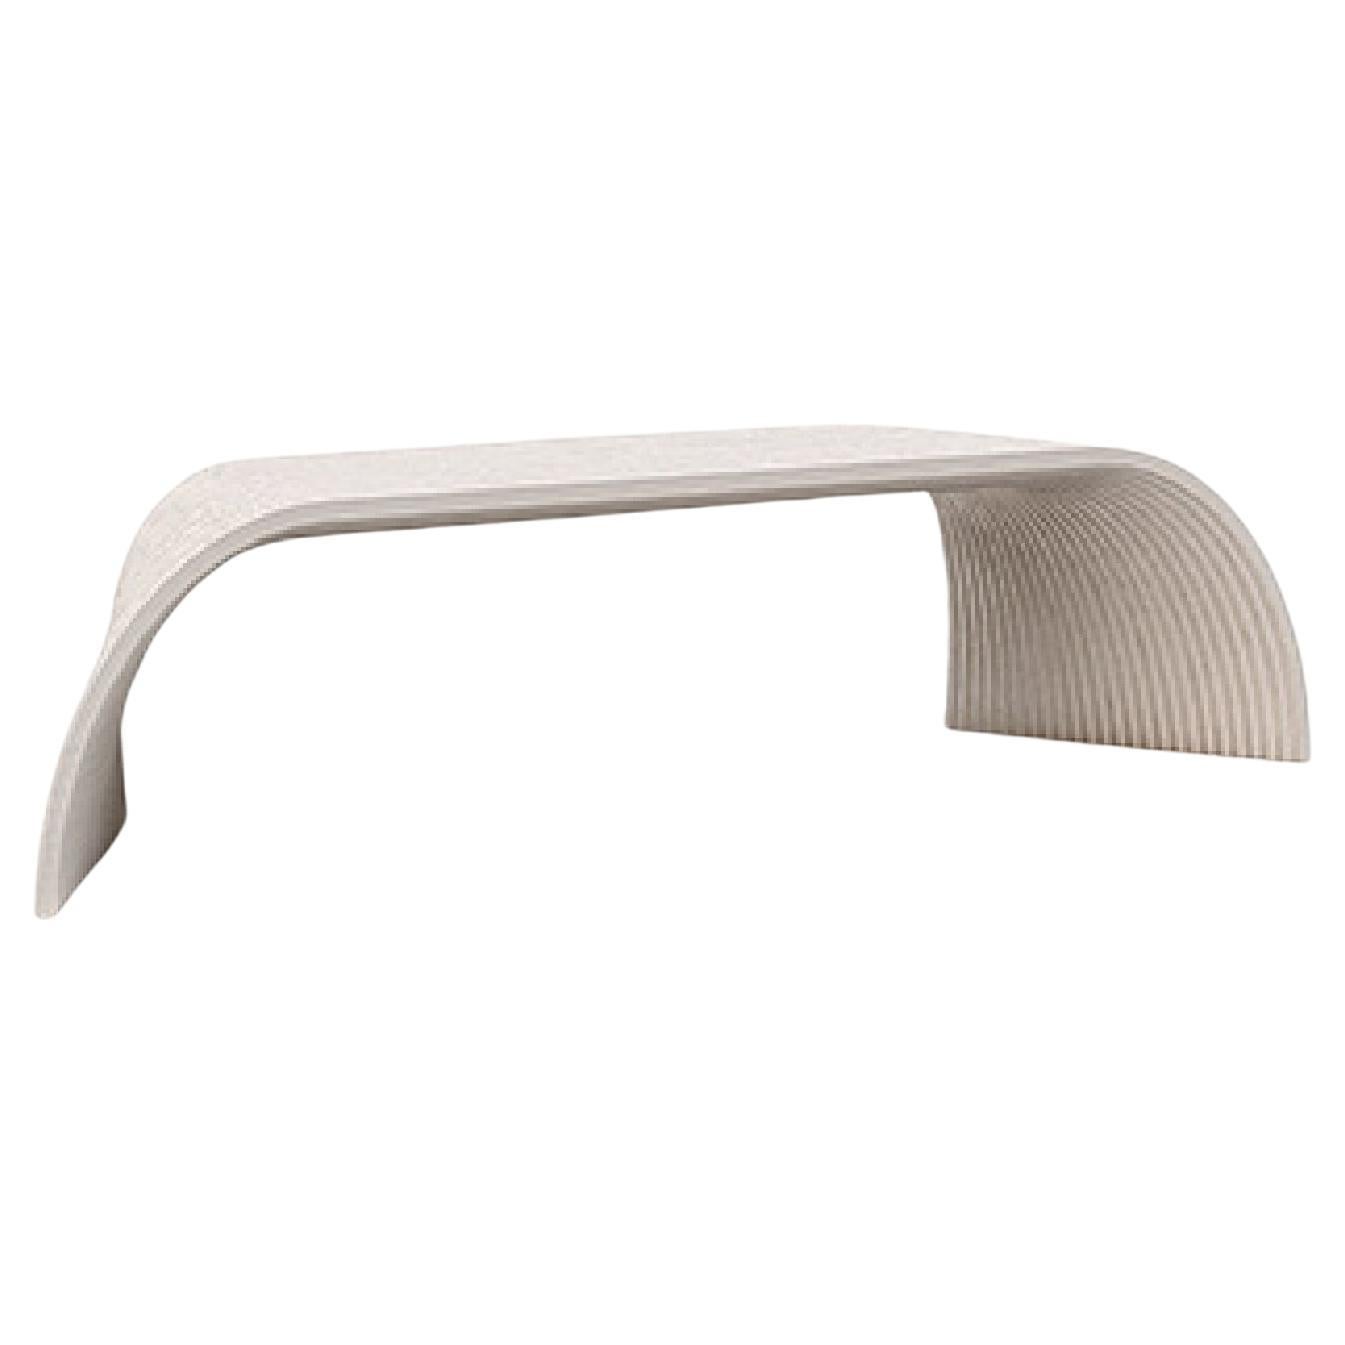 Arches Small by Piegatto, A Sculptural Bench